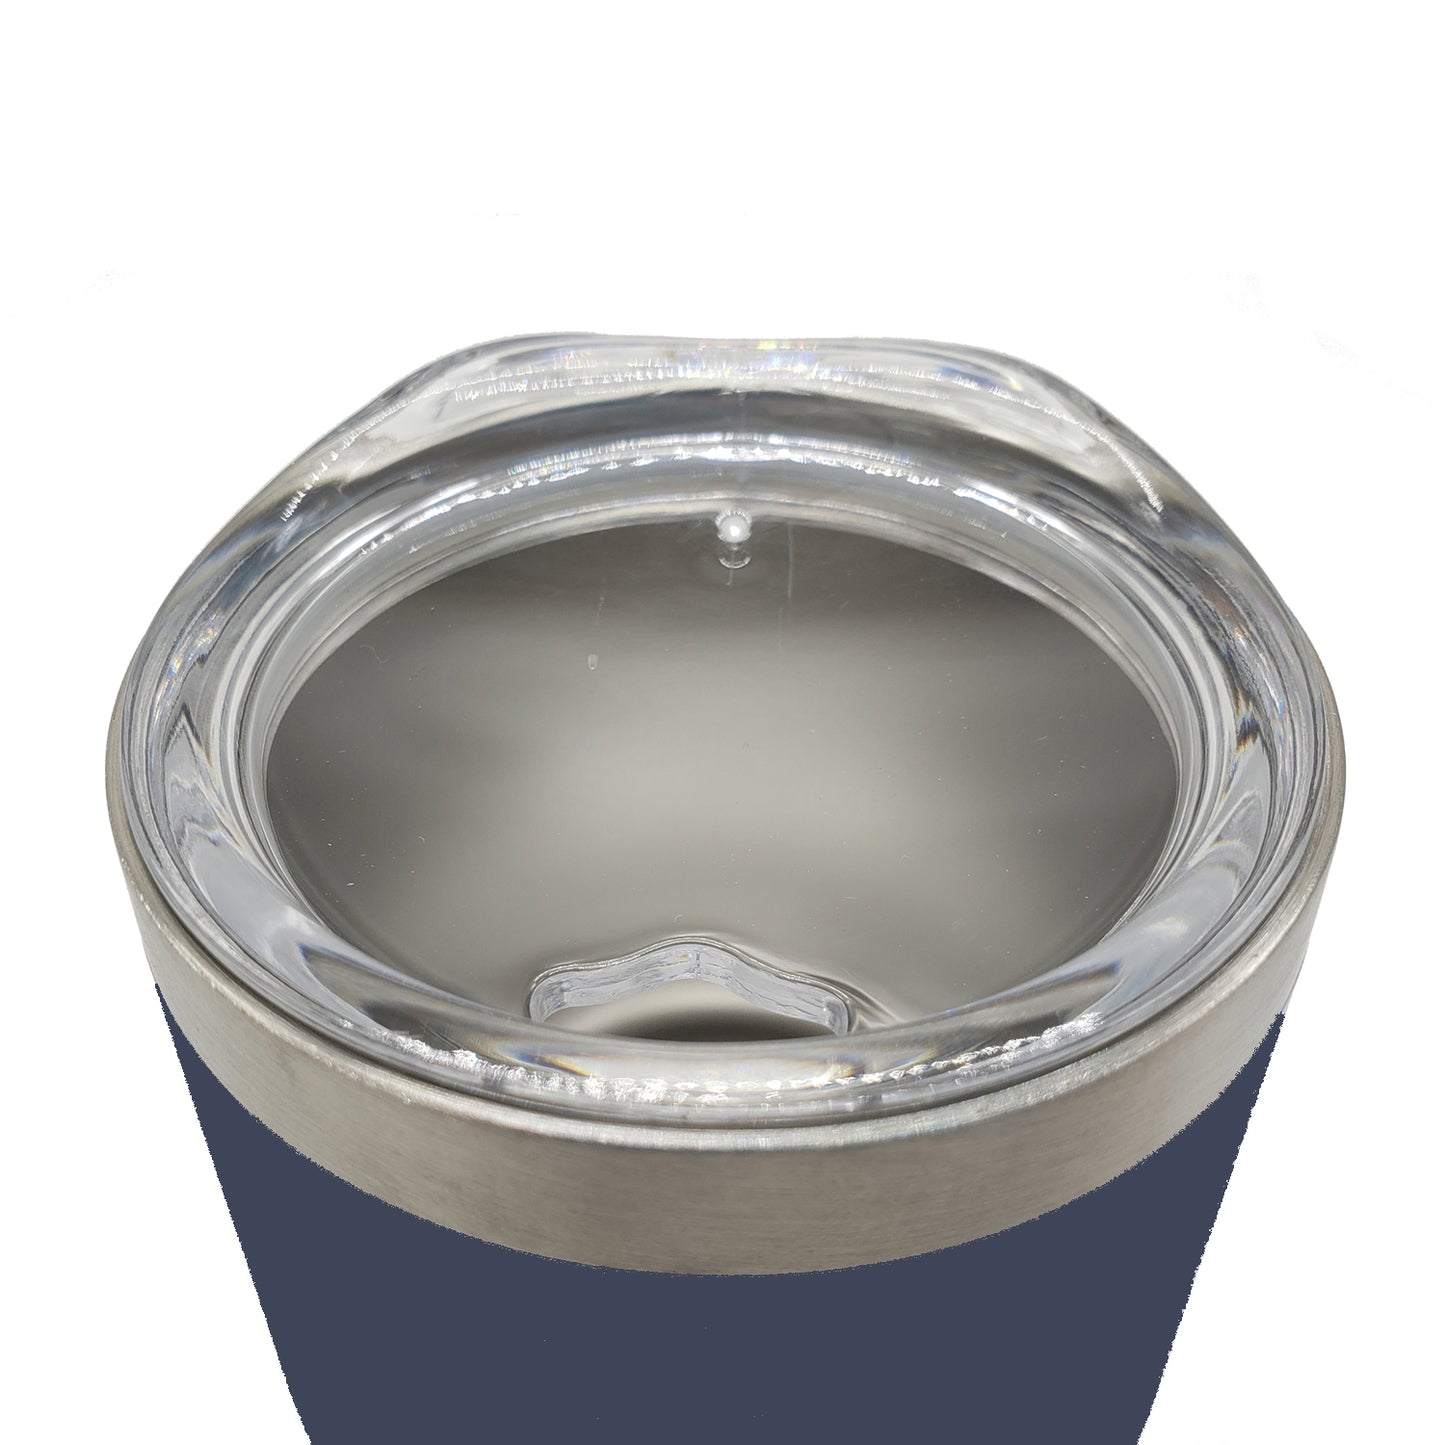 Lid for Docktails Navy shatterproof insulated wine cup